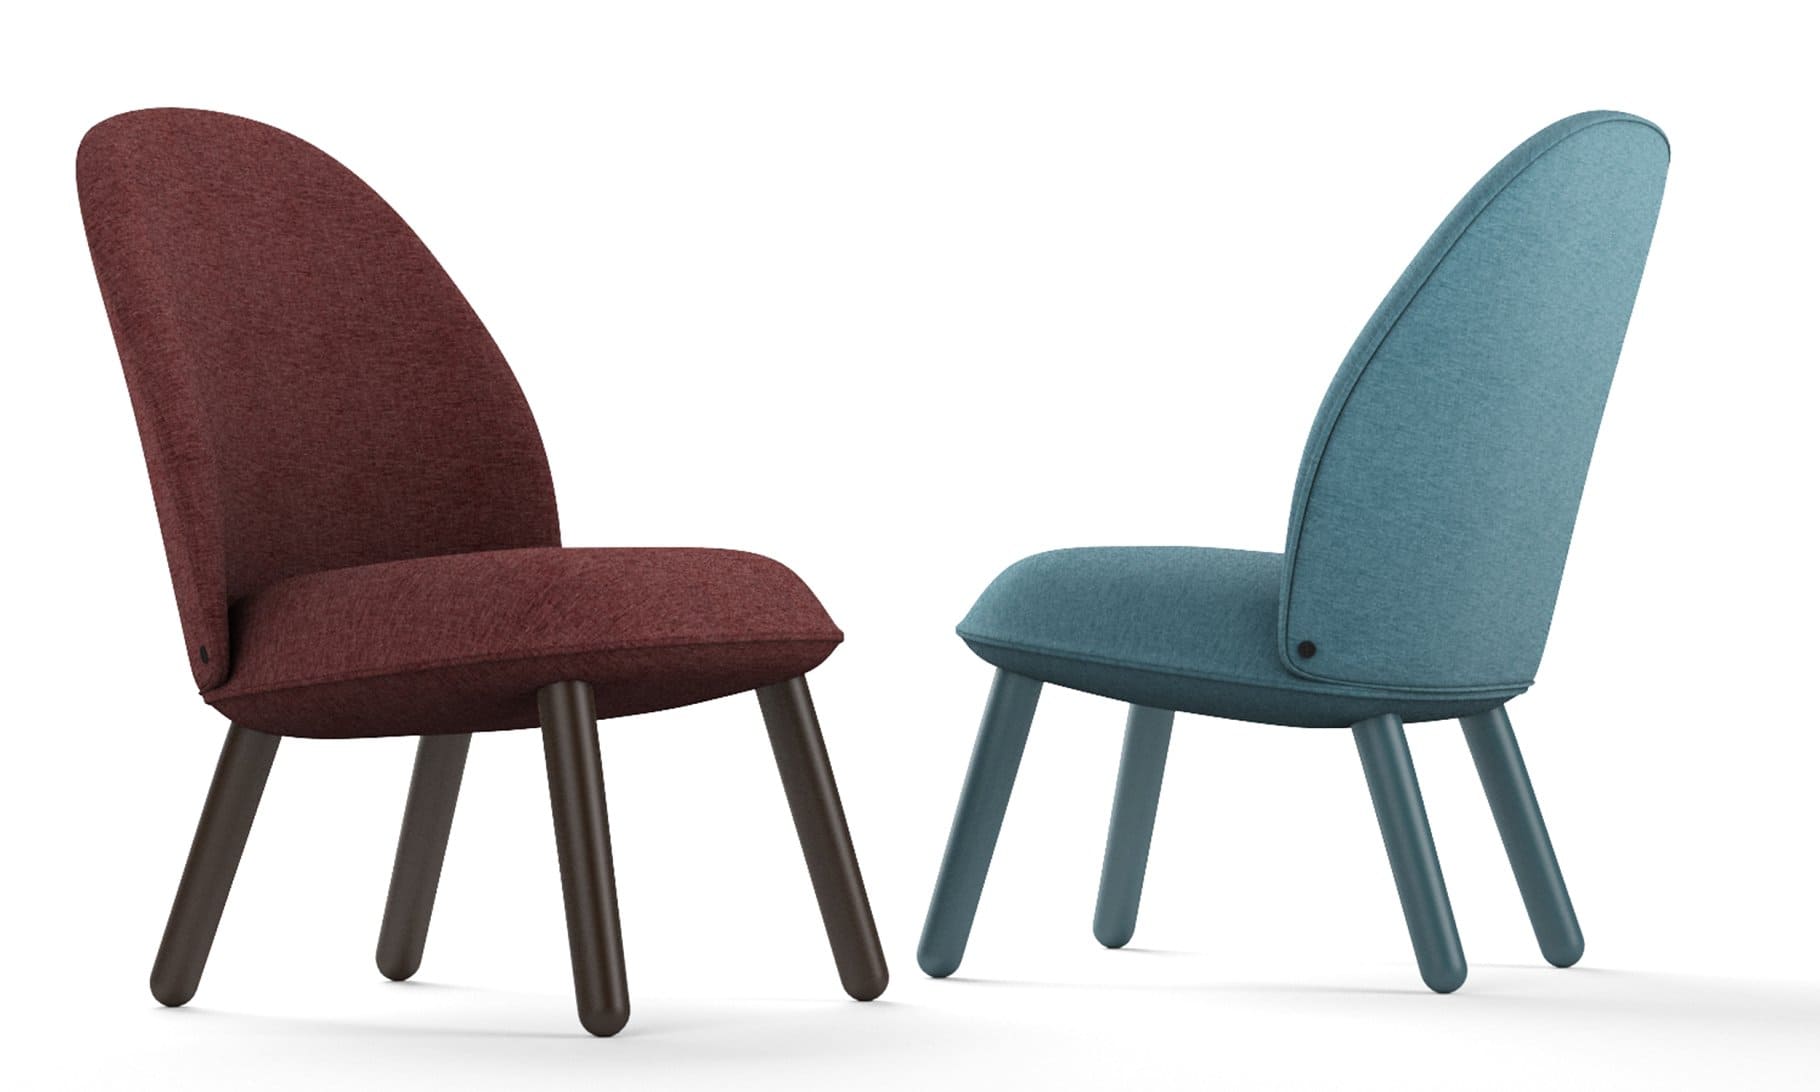 Burgundy and blue ACE Lounge Chair with burgundy and blue legs.